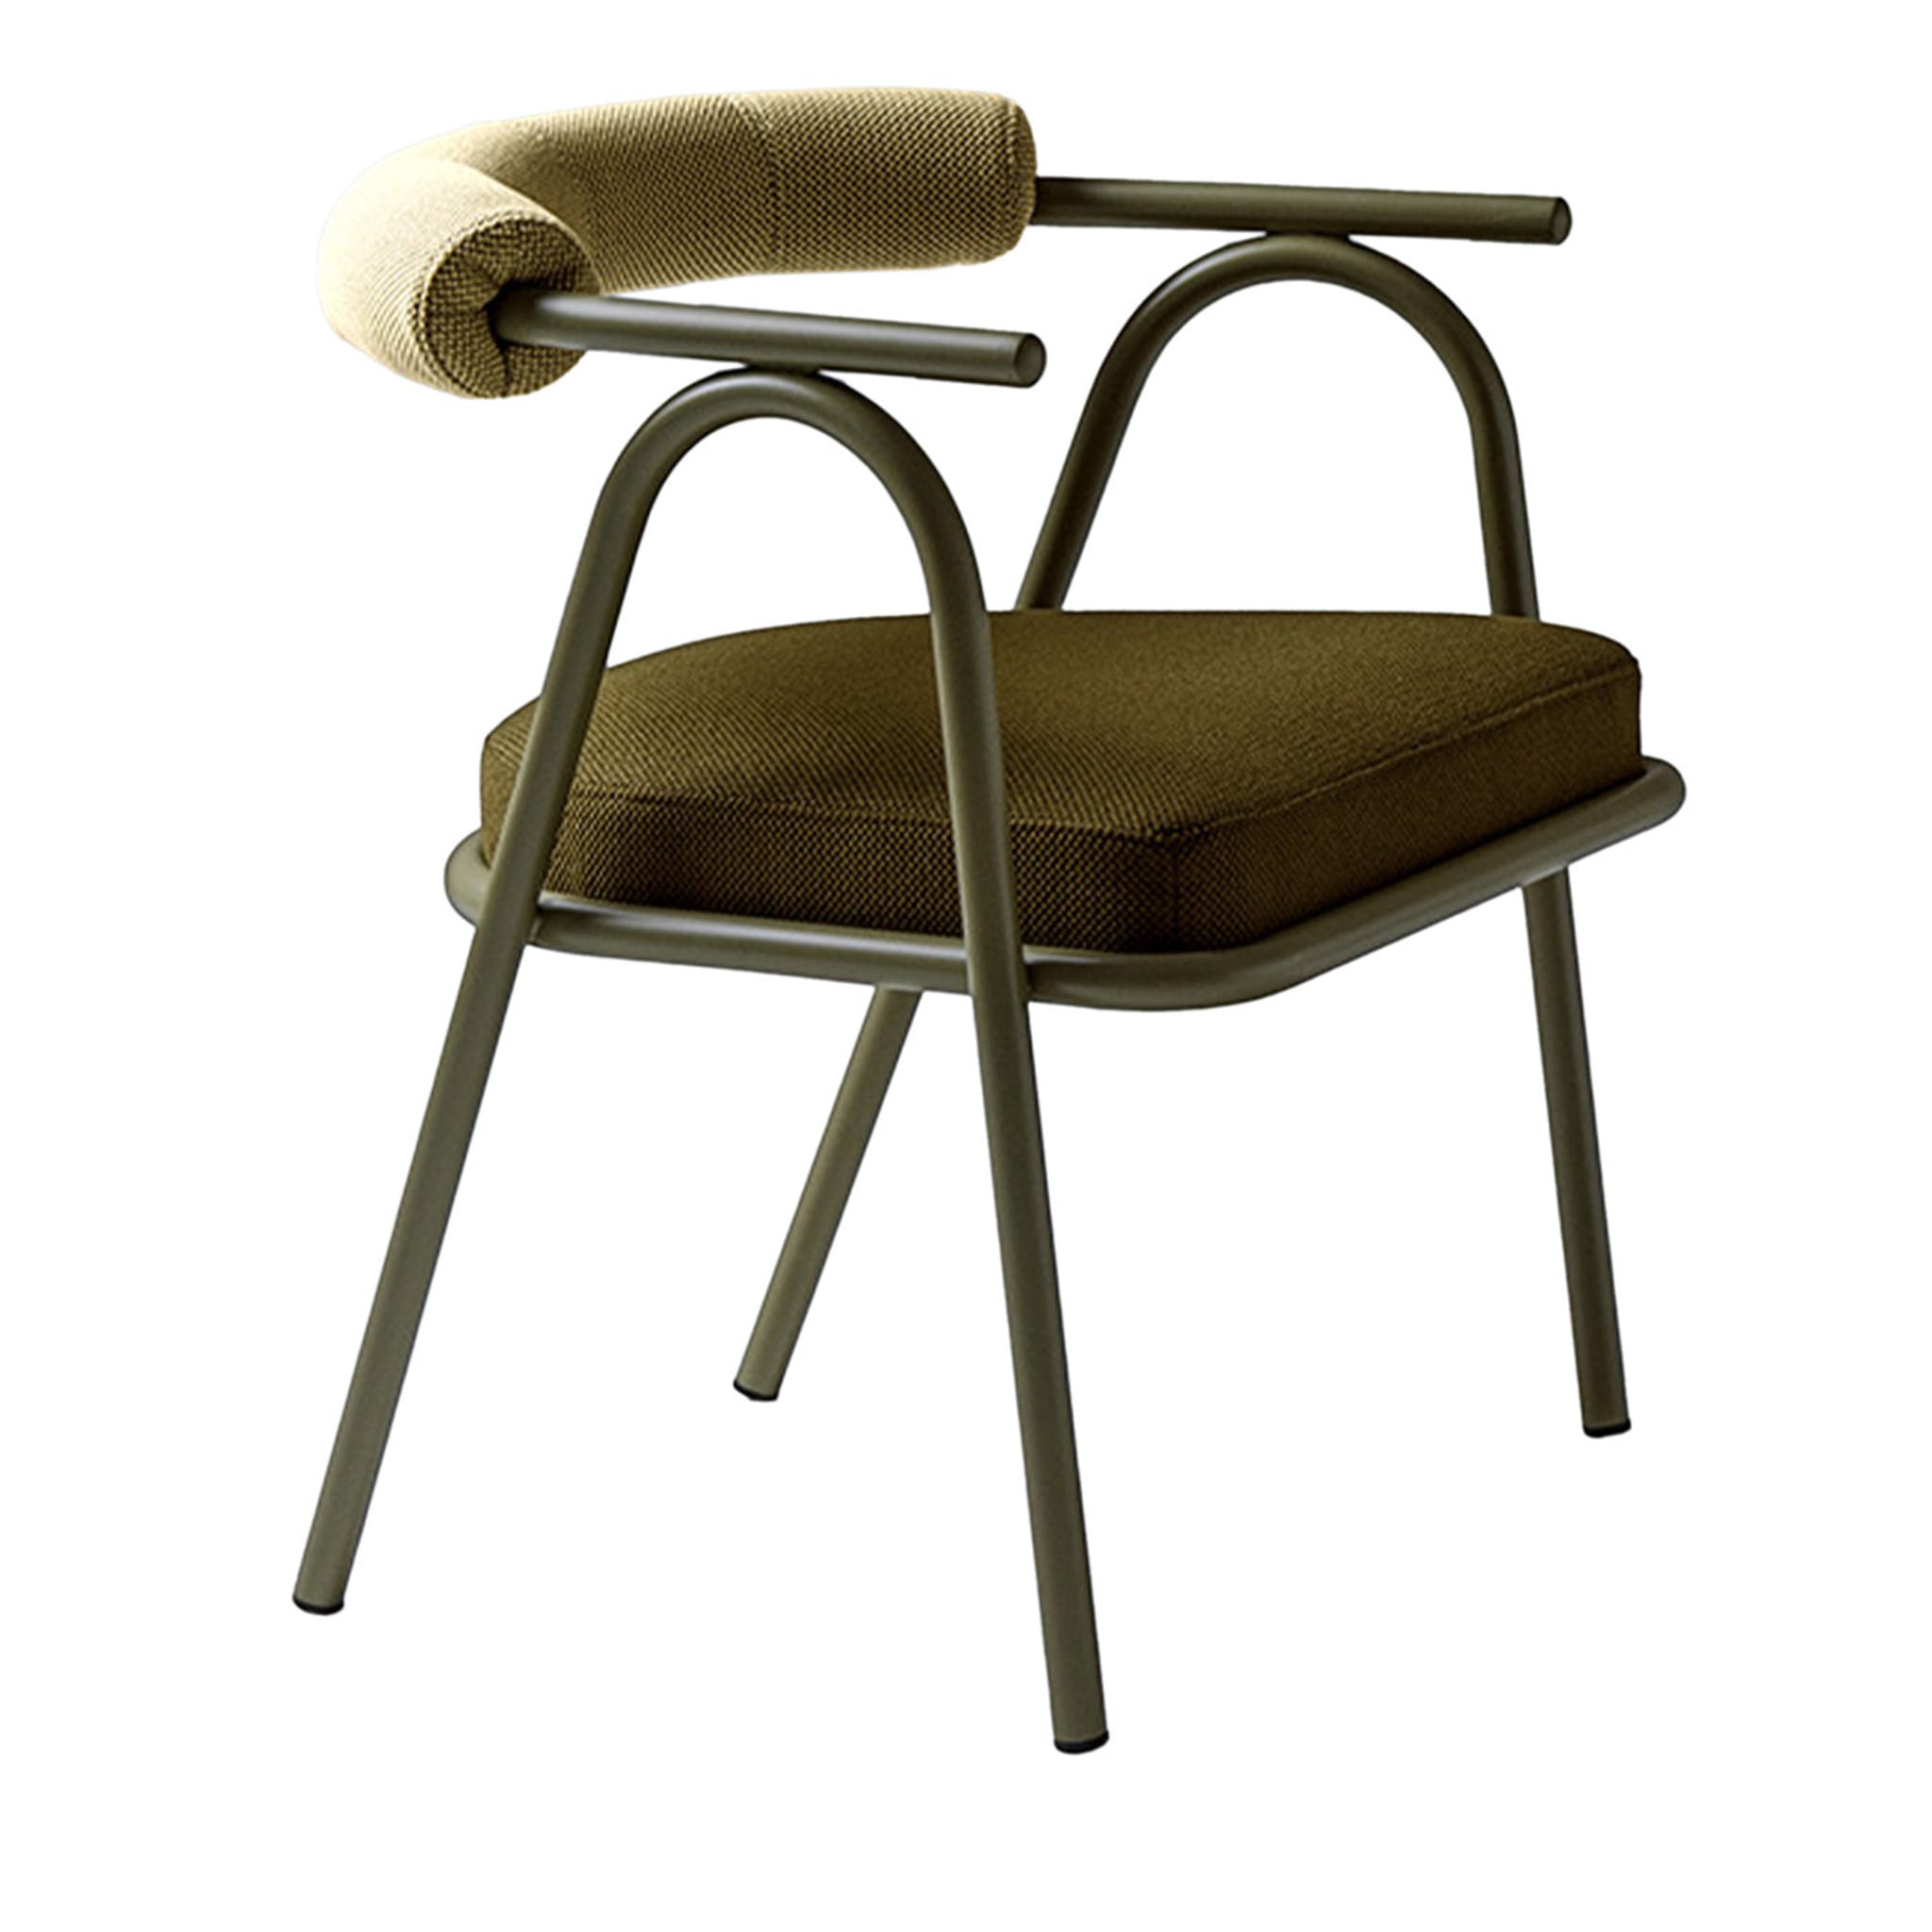 Baba Olive Green Armchair by Serena Confalonieri - Main view